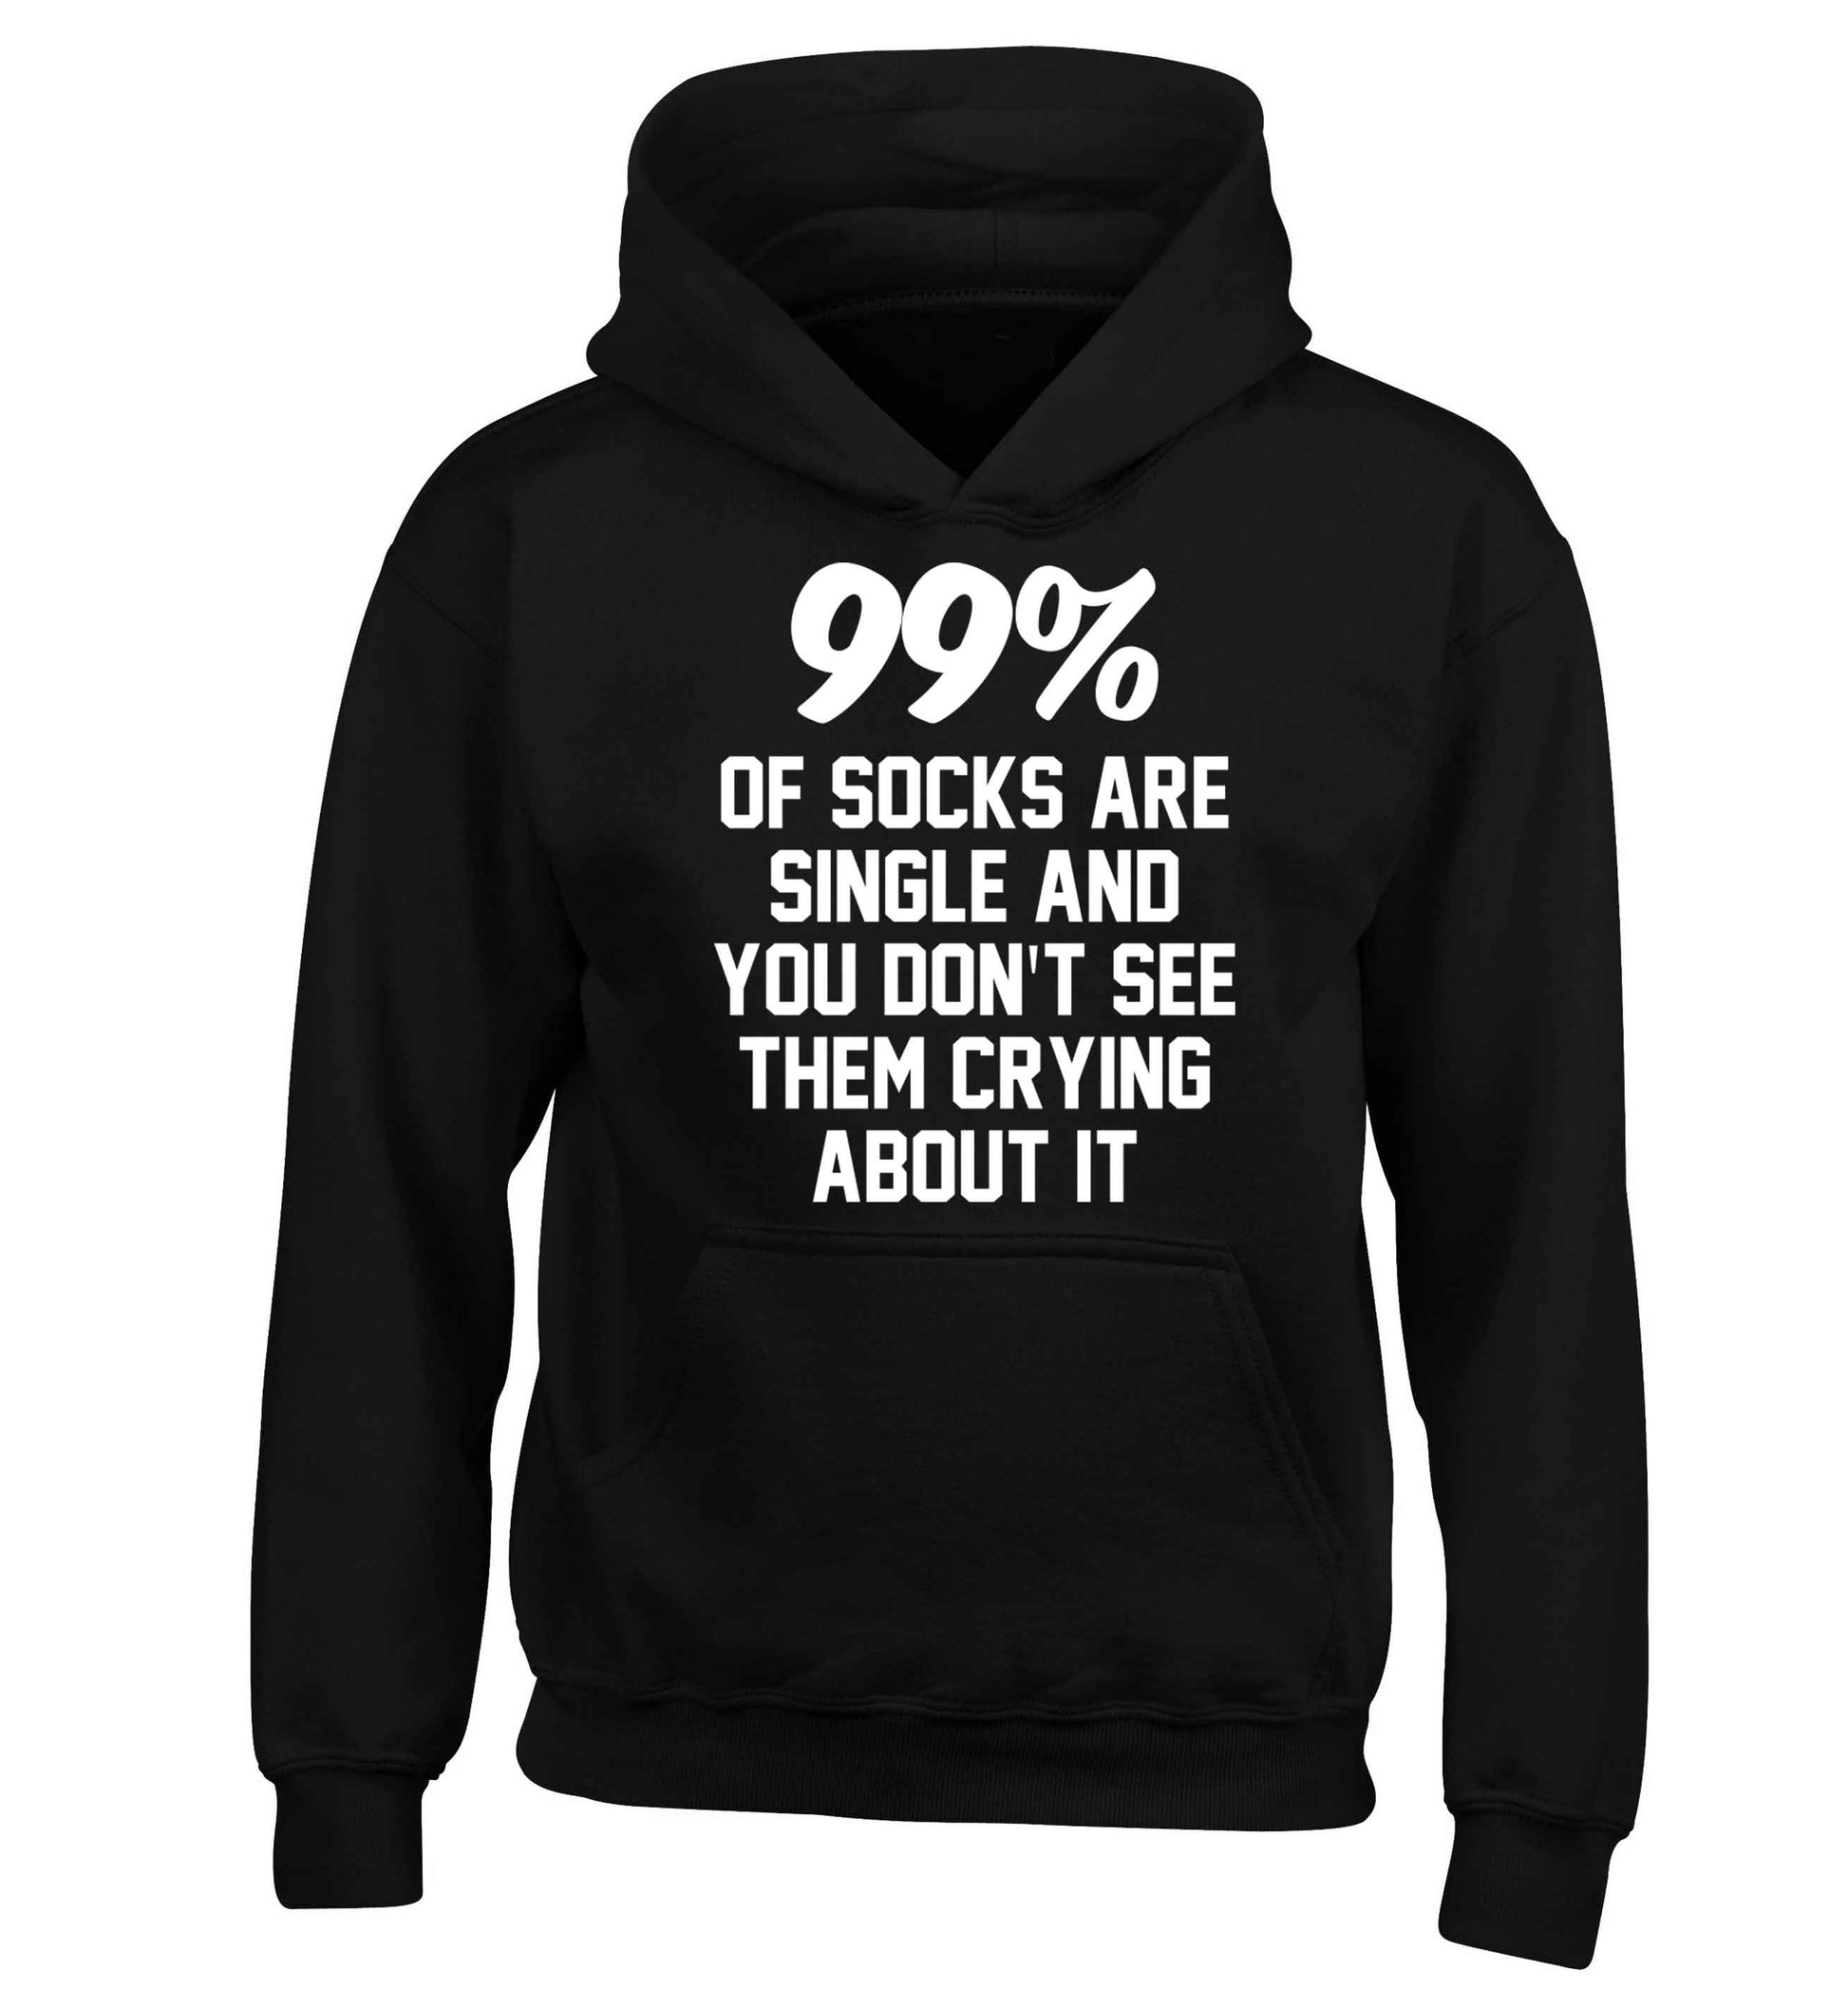 99% of socks are single and you don't see them crying about it children's black hoodie 12-13 Years